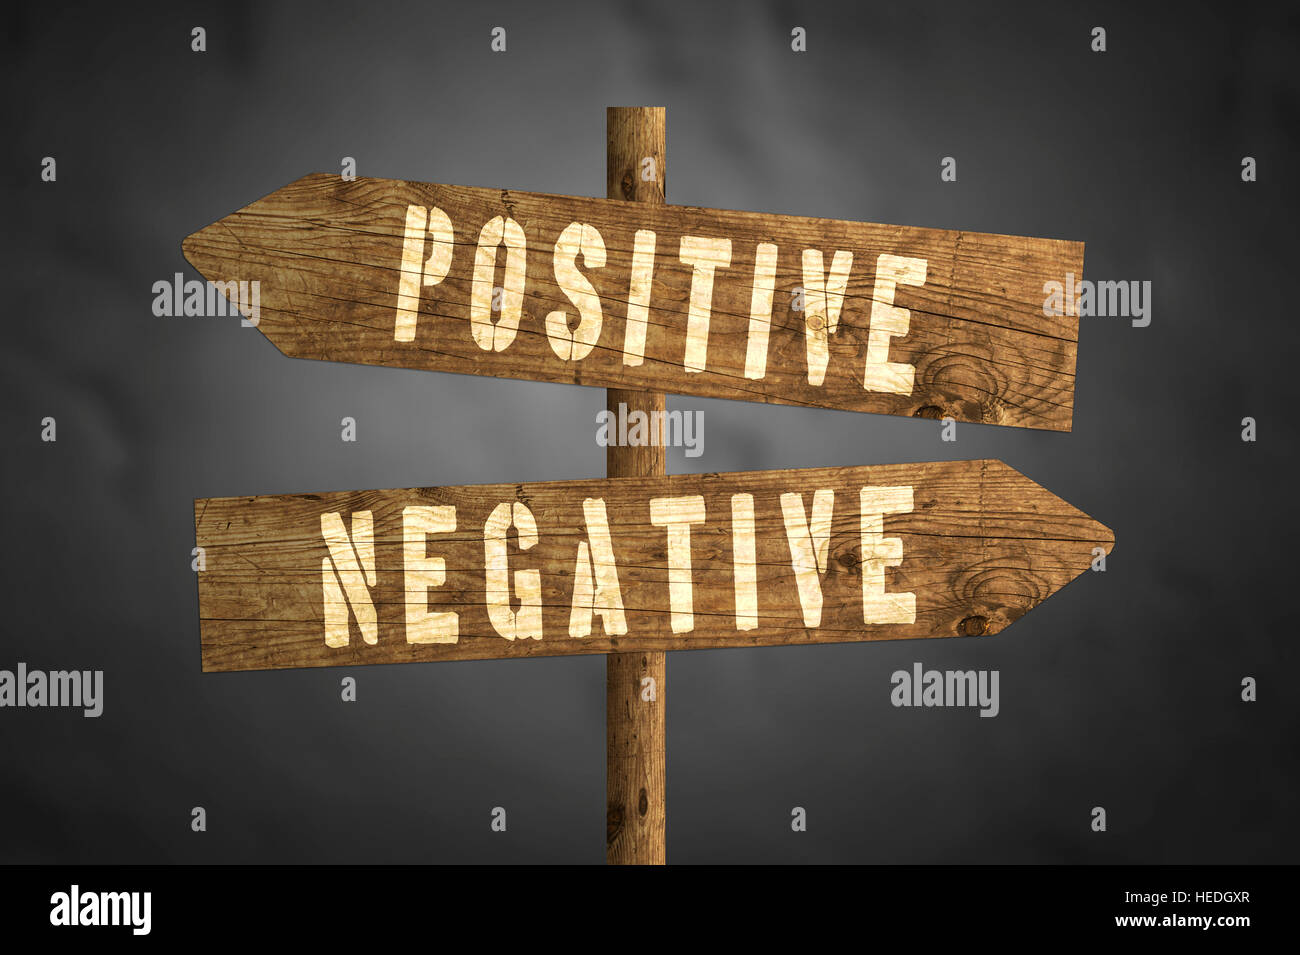 Positive or Negative concept road sign isolated on dark background. Stock Photo